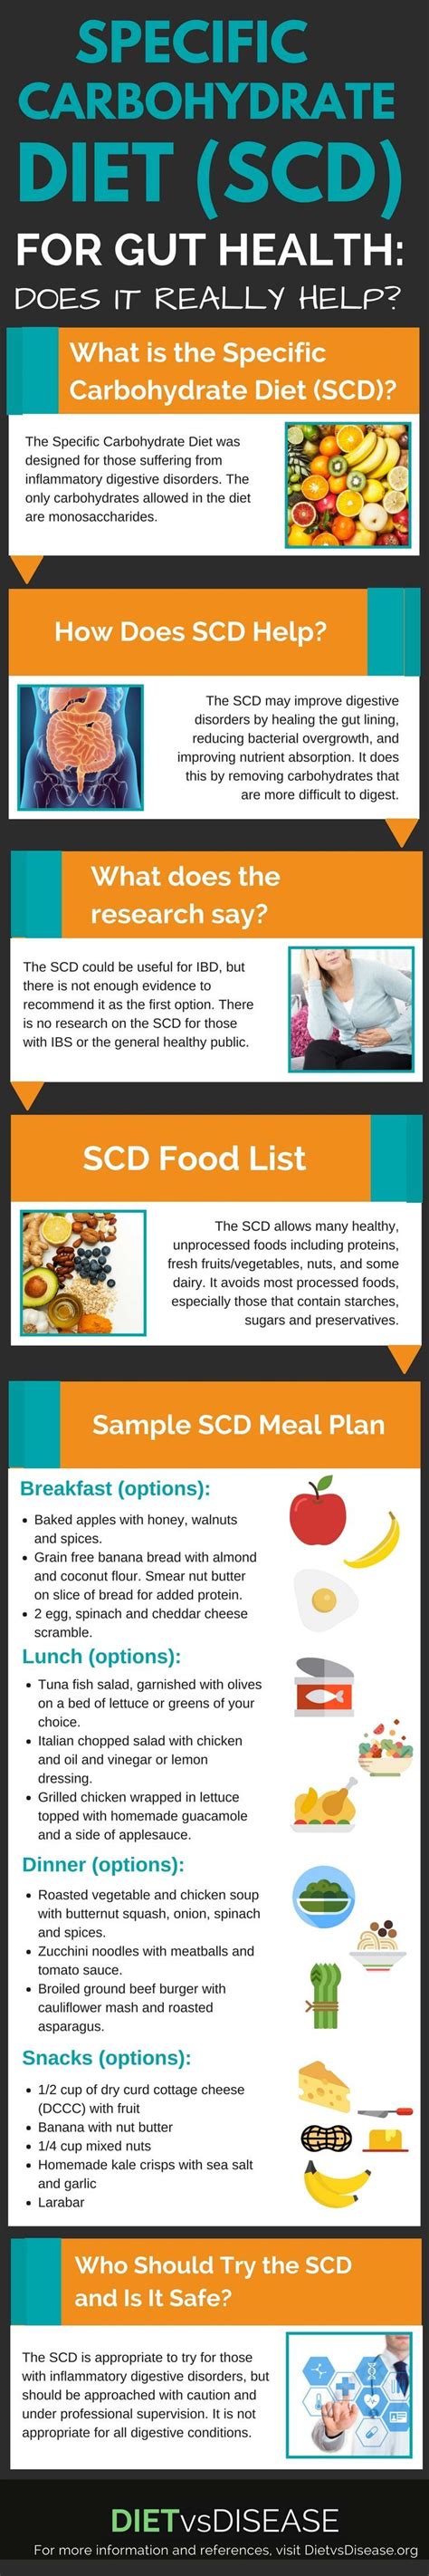 Specific Carbohydrate Diet Scd For Gut Health Does It Really Help